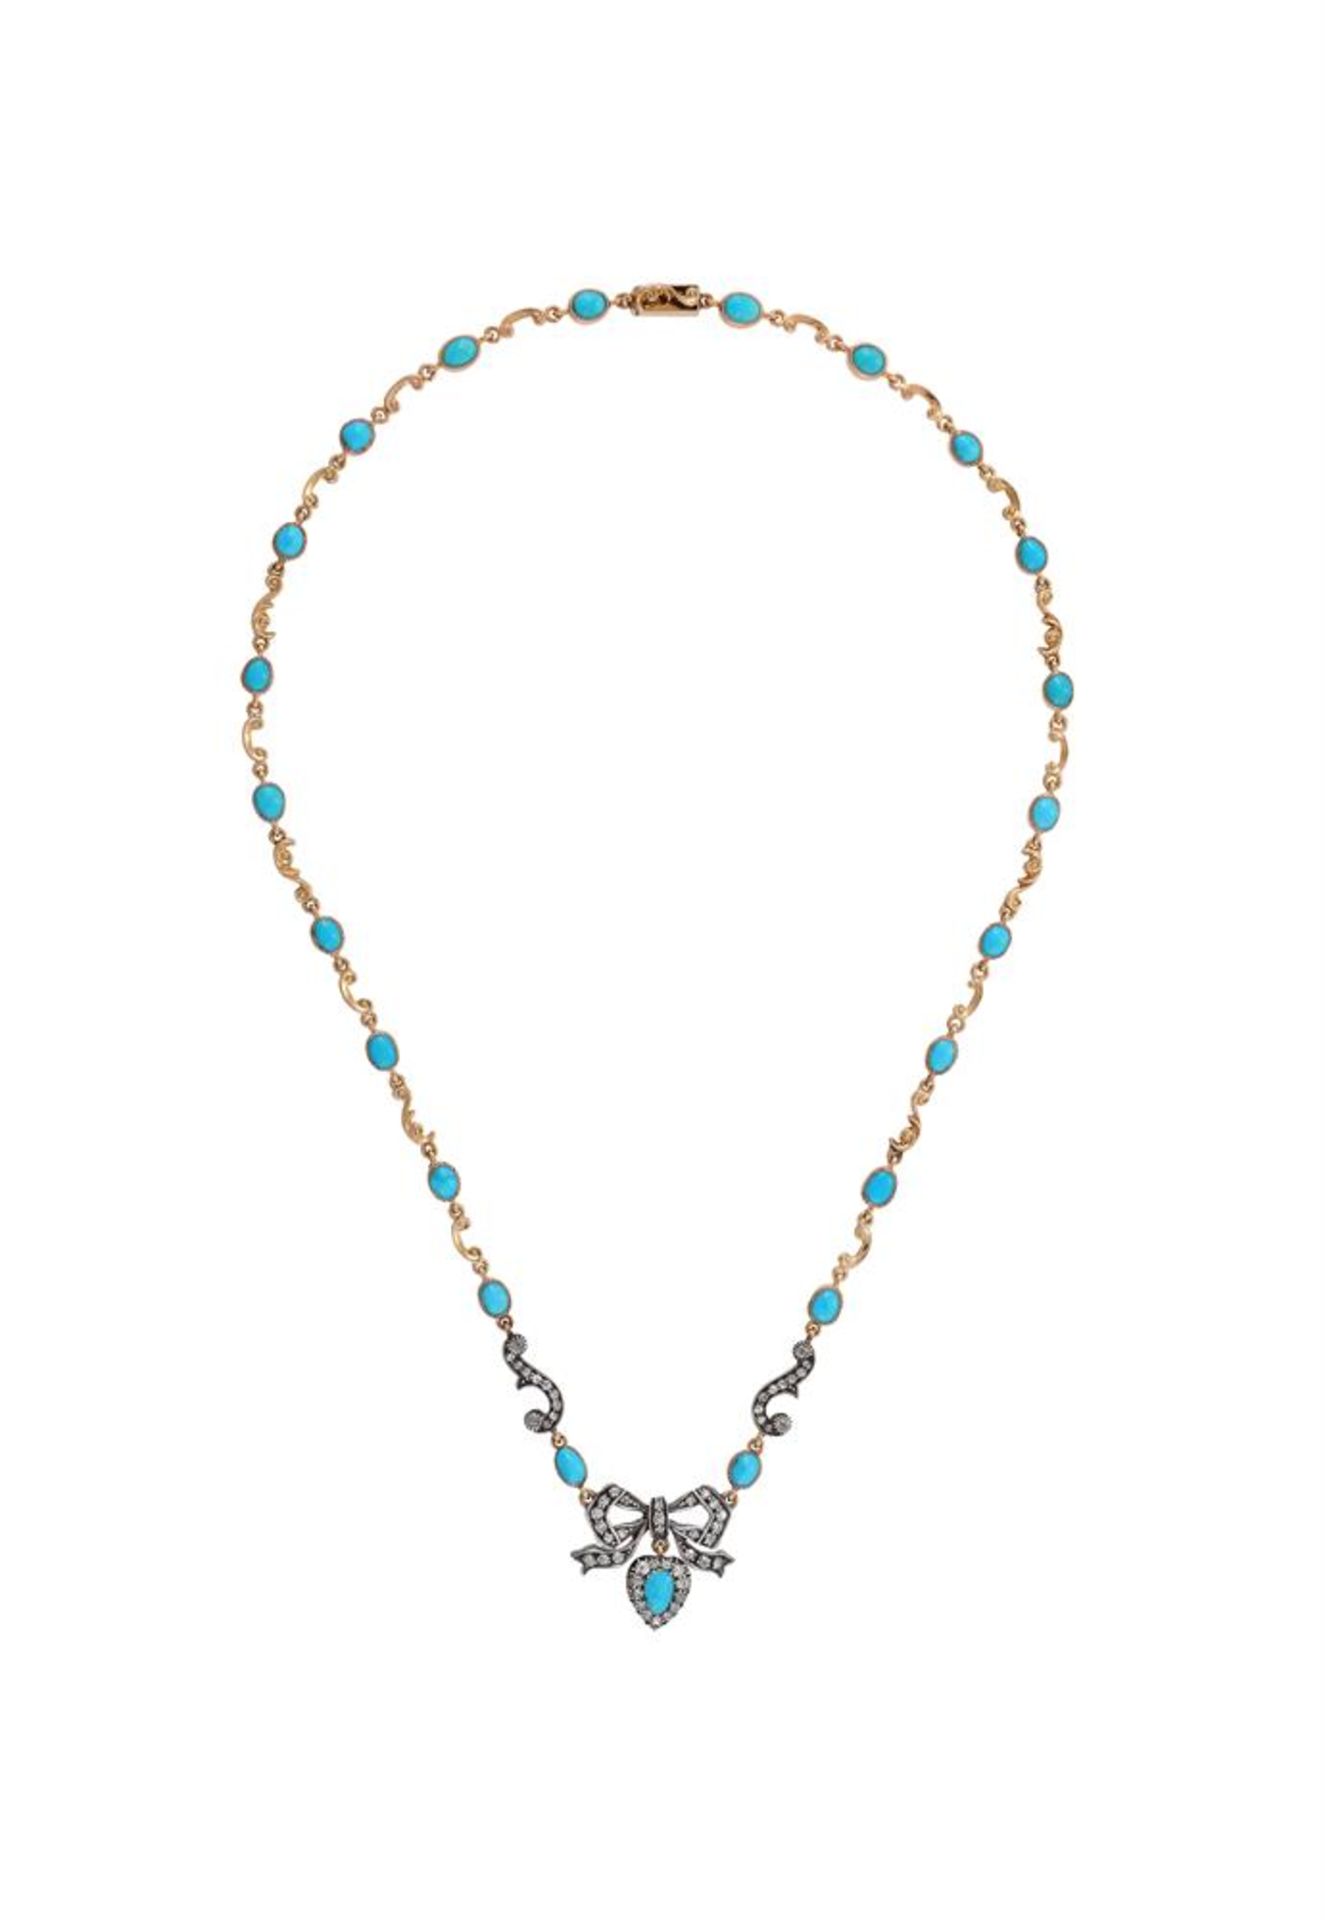 A TURQUOISE AND DIAMOND BOW NECKLACE